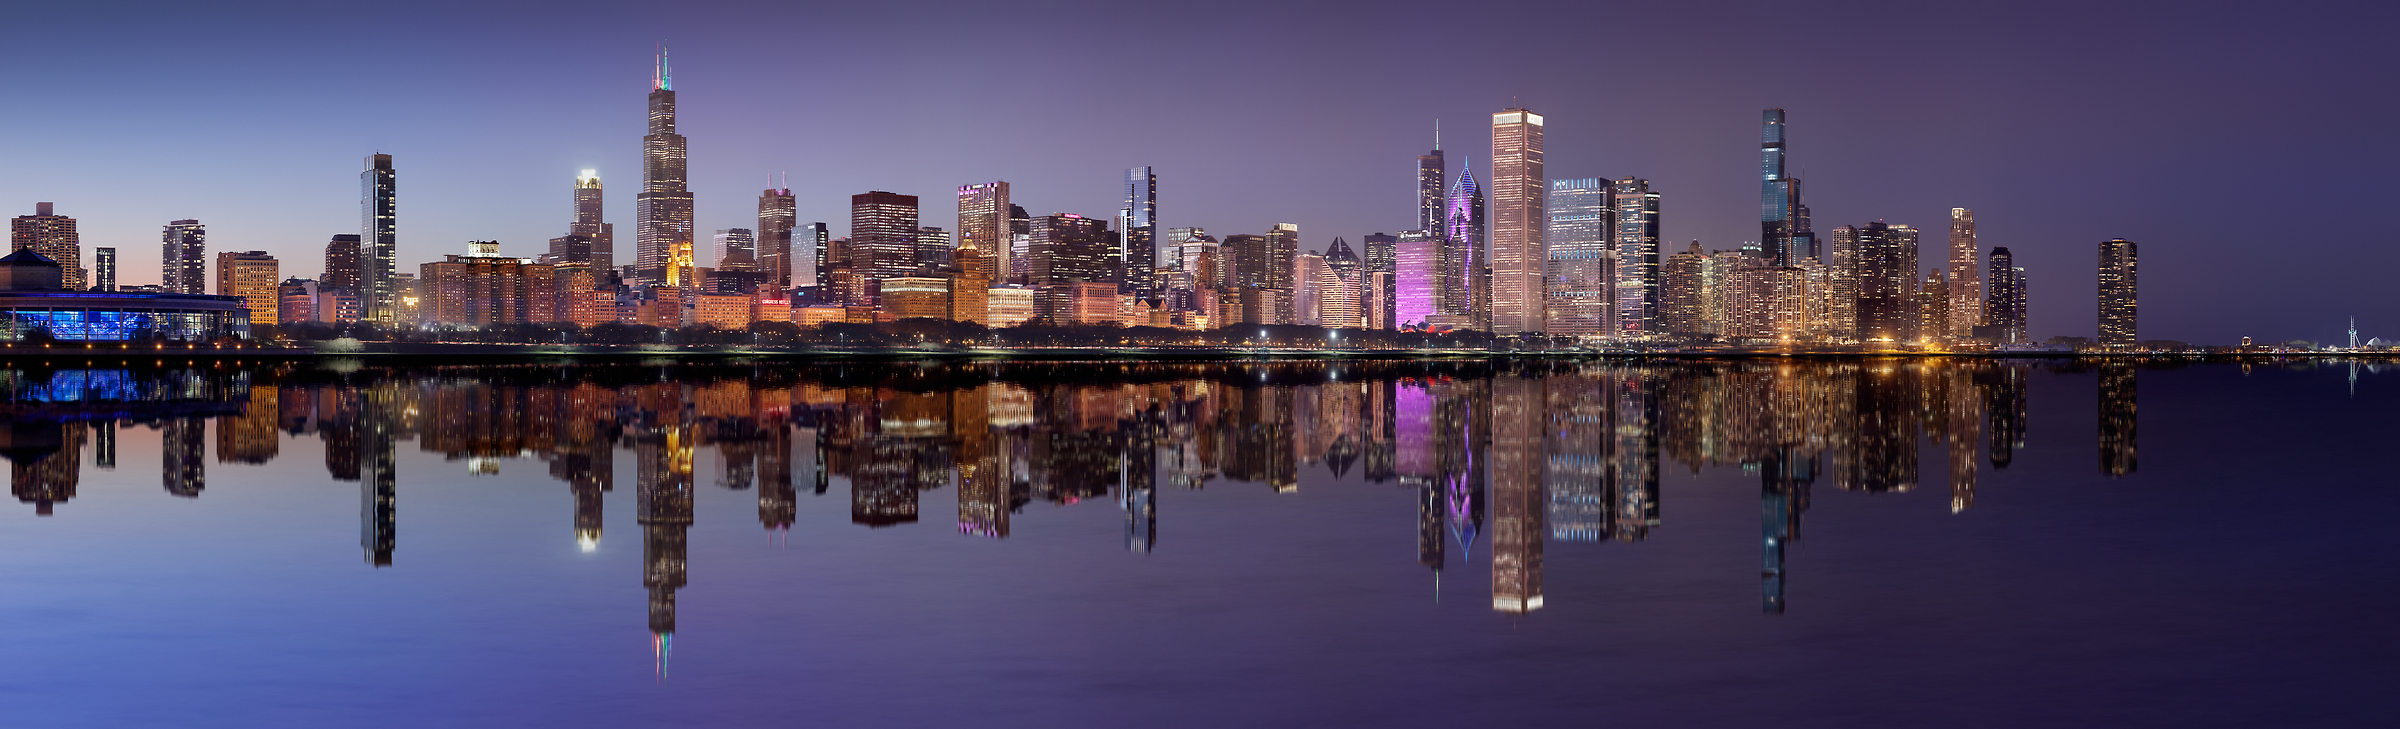 1,185 megapixels! A very high resolution, large-format VAST photo print of the Chicago skyline at night with Lake Michigan in the foreground; cityscape photograph created by Phil Crawshay in Chicago, Illinois.